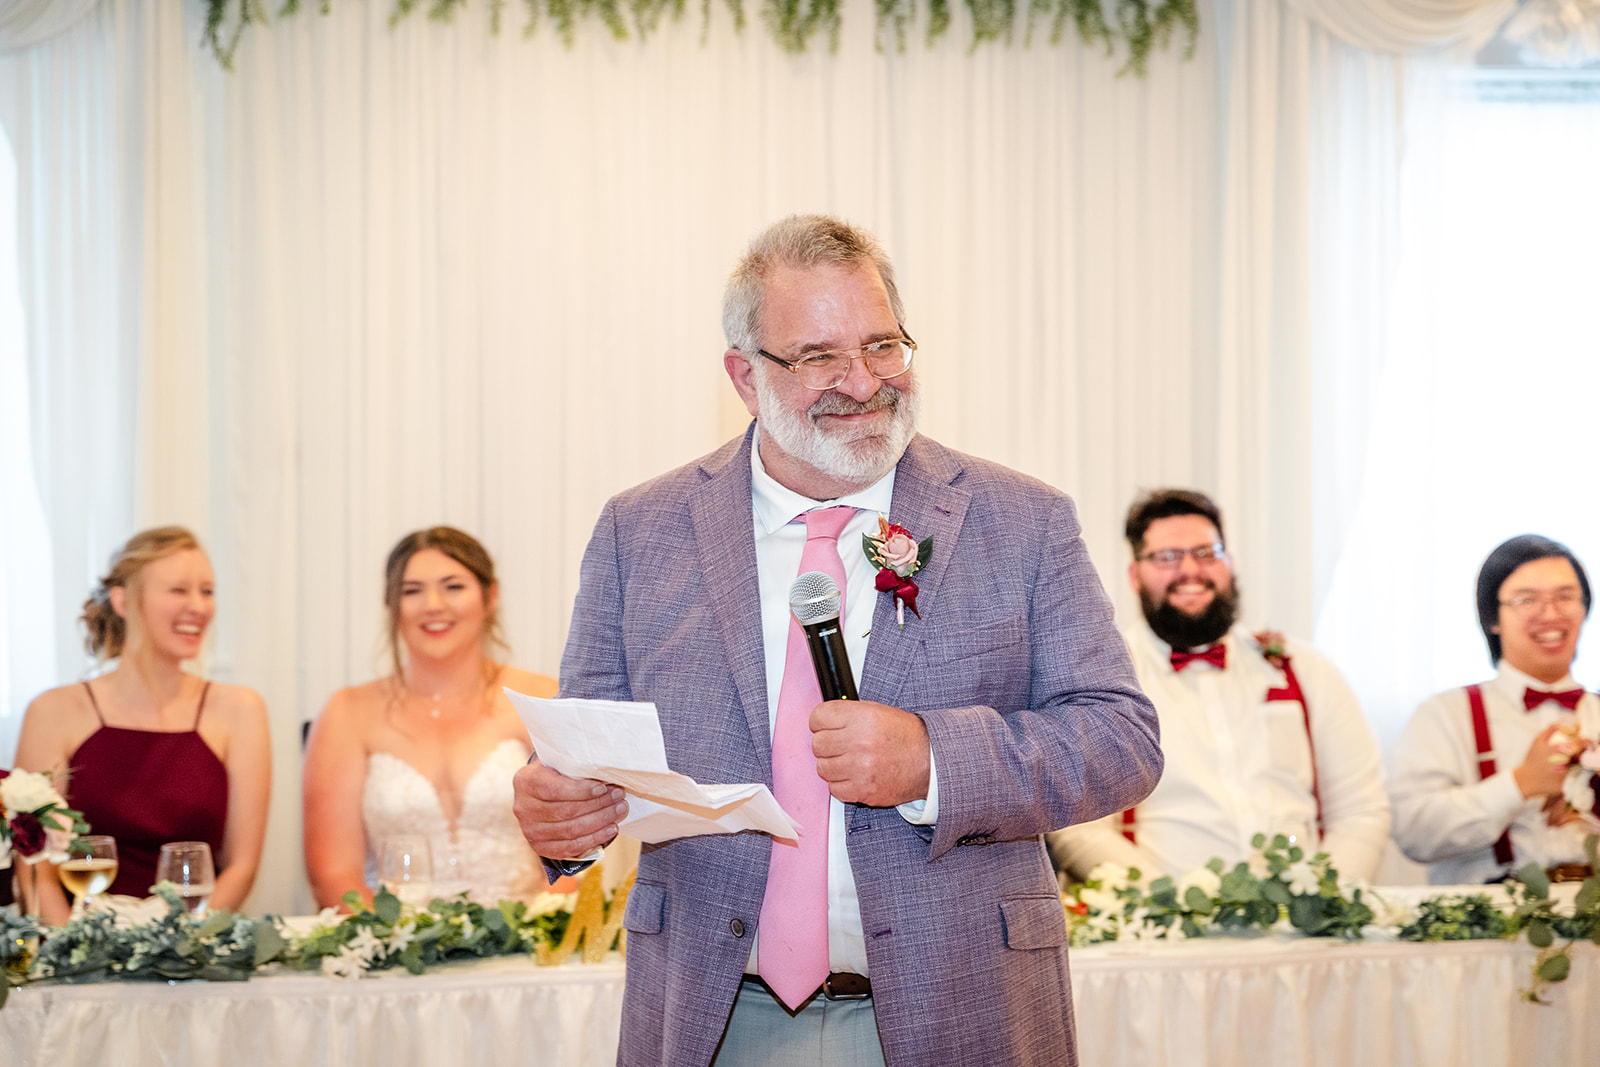 Father of the Bride giving a speech